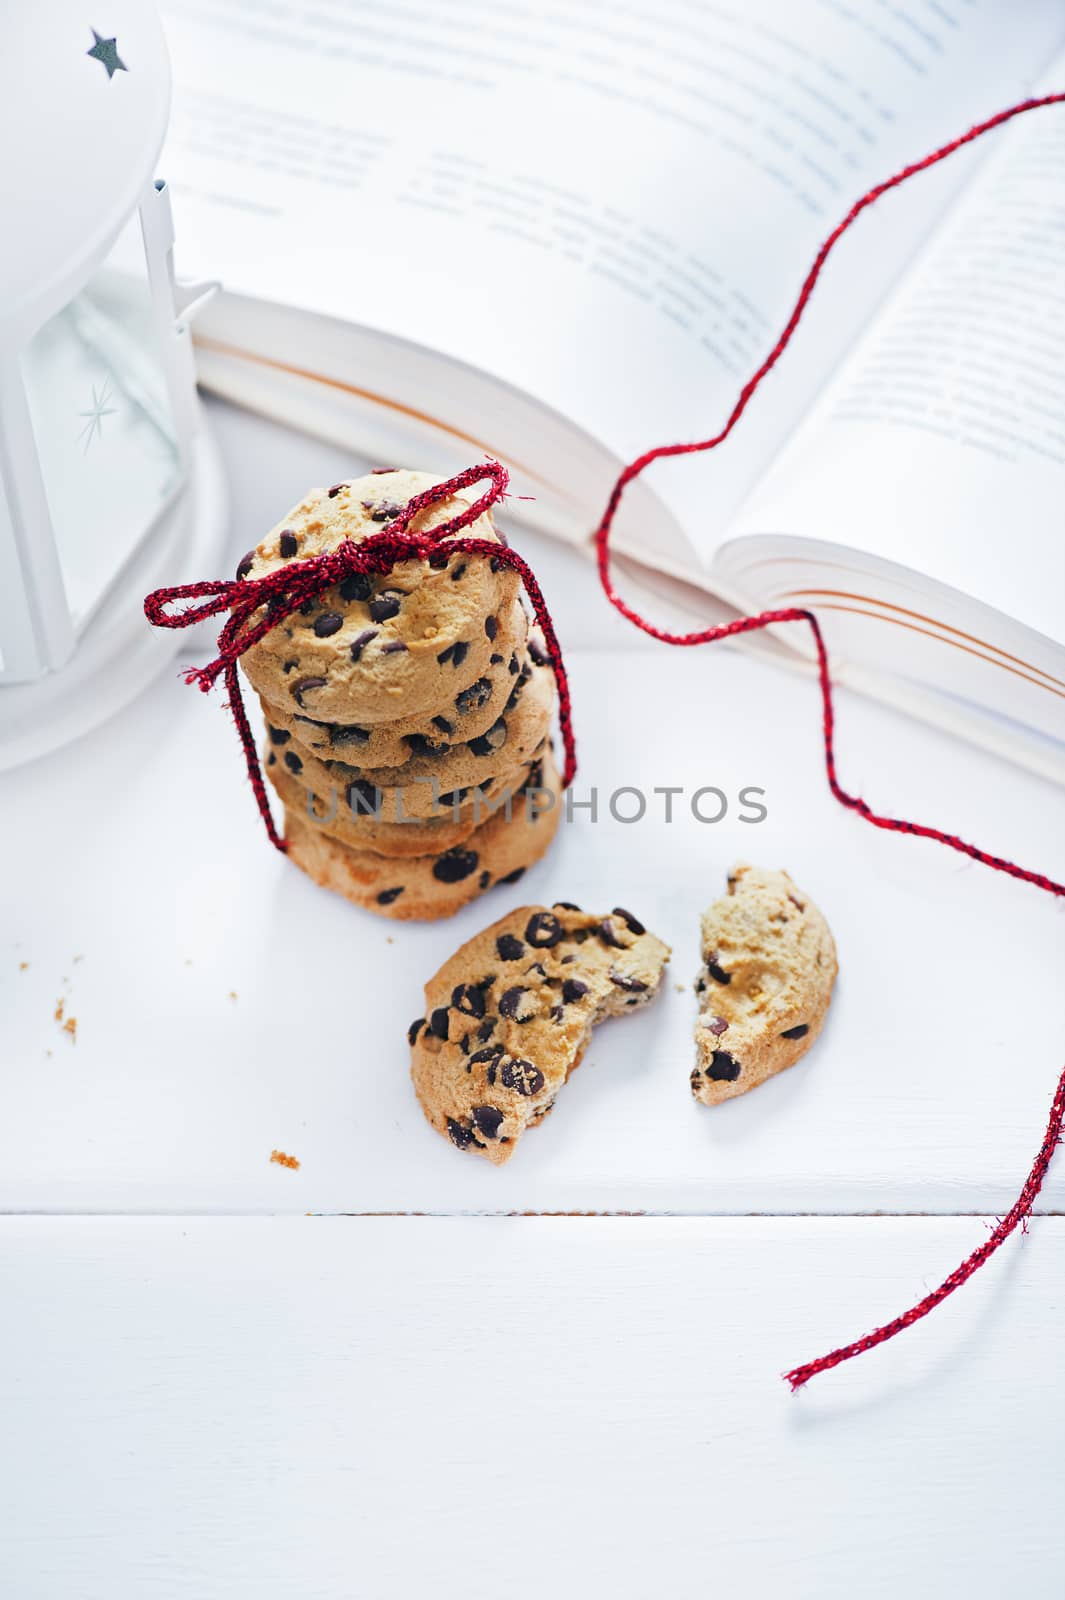 American cookies with chocolate next to the book on white table by Michalowski